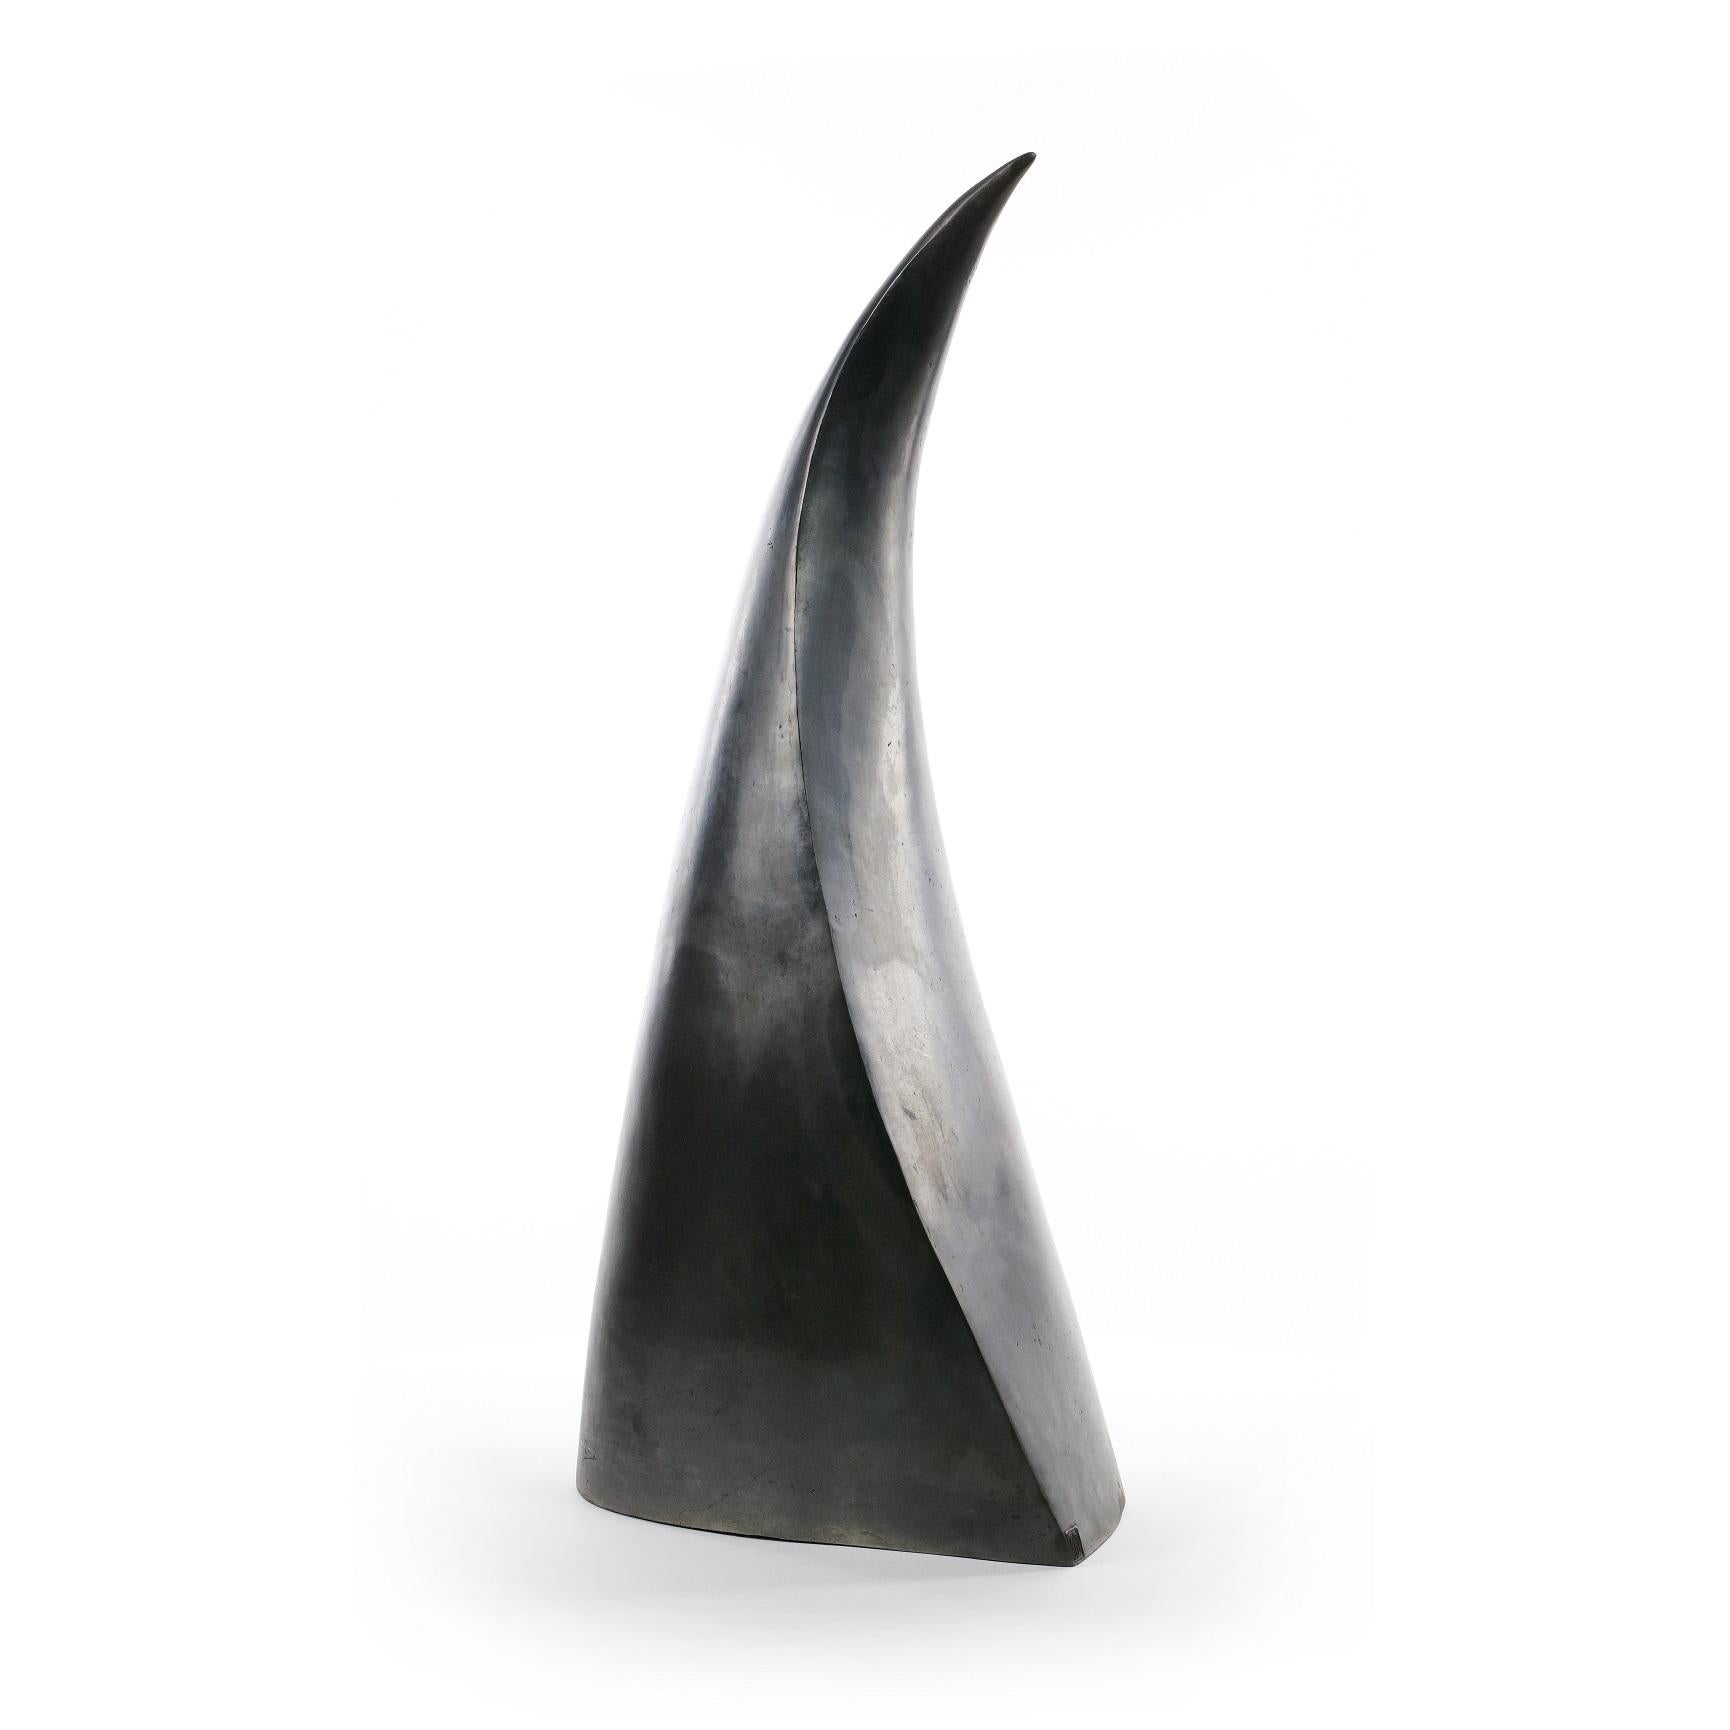 Pinnacle is a unique ceramic sculpture by contemporary artist Tien Wen, dimensions are 74 × 39 × 34 cm (29.1 × 15.4 × 13.4 in). 
The sculpture is signed comes with a certificate of authenticity.

The sculpture has a metallic quality that is similar